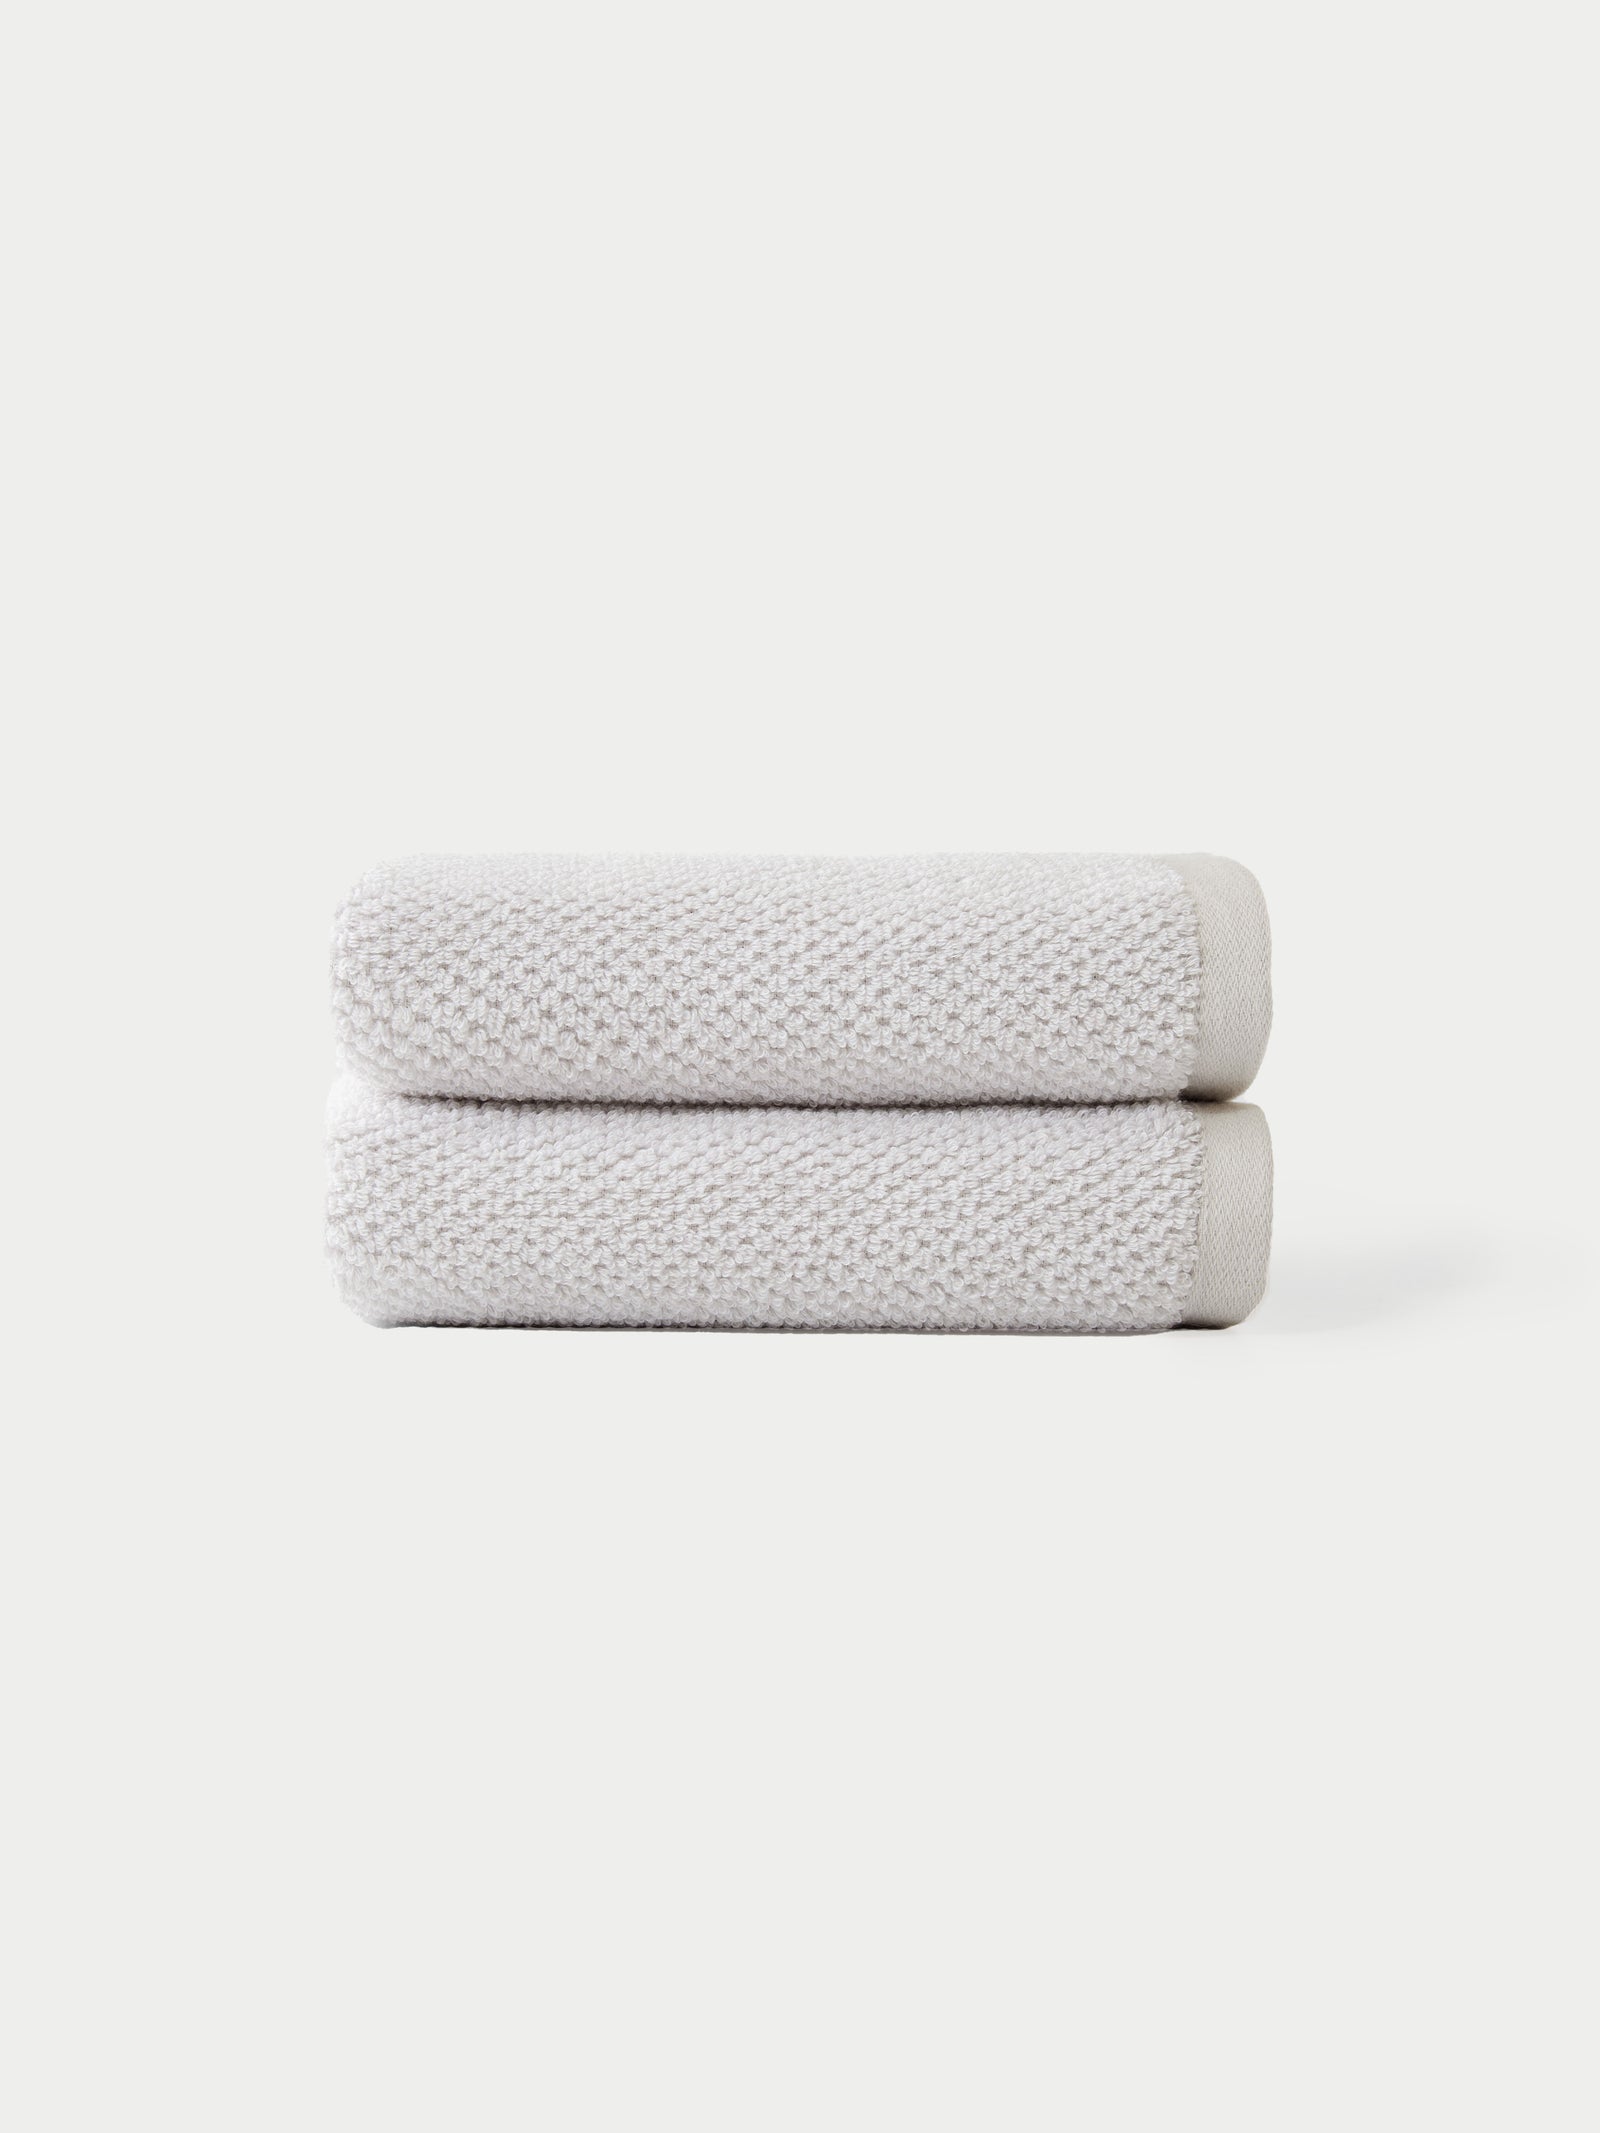 "Nantucket Hand Towels in the color Heathered Light Grey. The Hand Towels are neatly folded. The photo of the Hand Towels was taken with a white background.